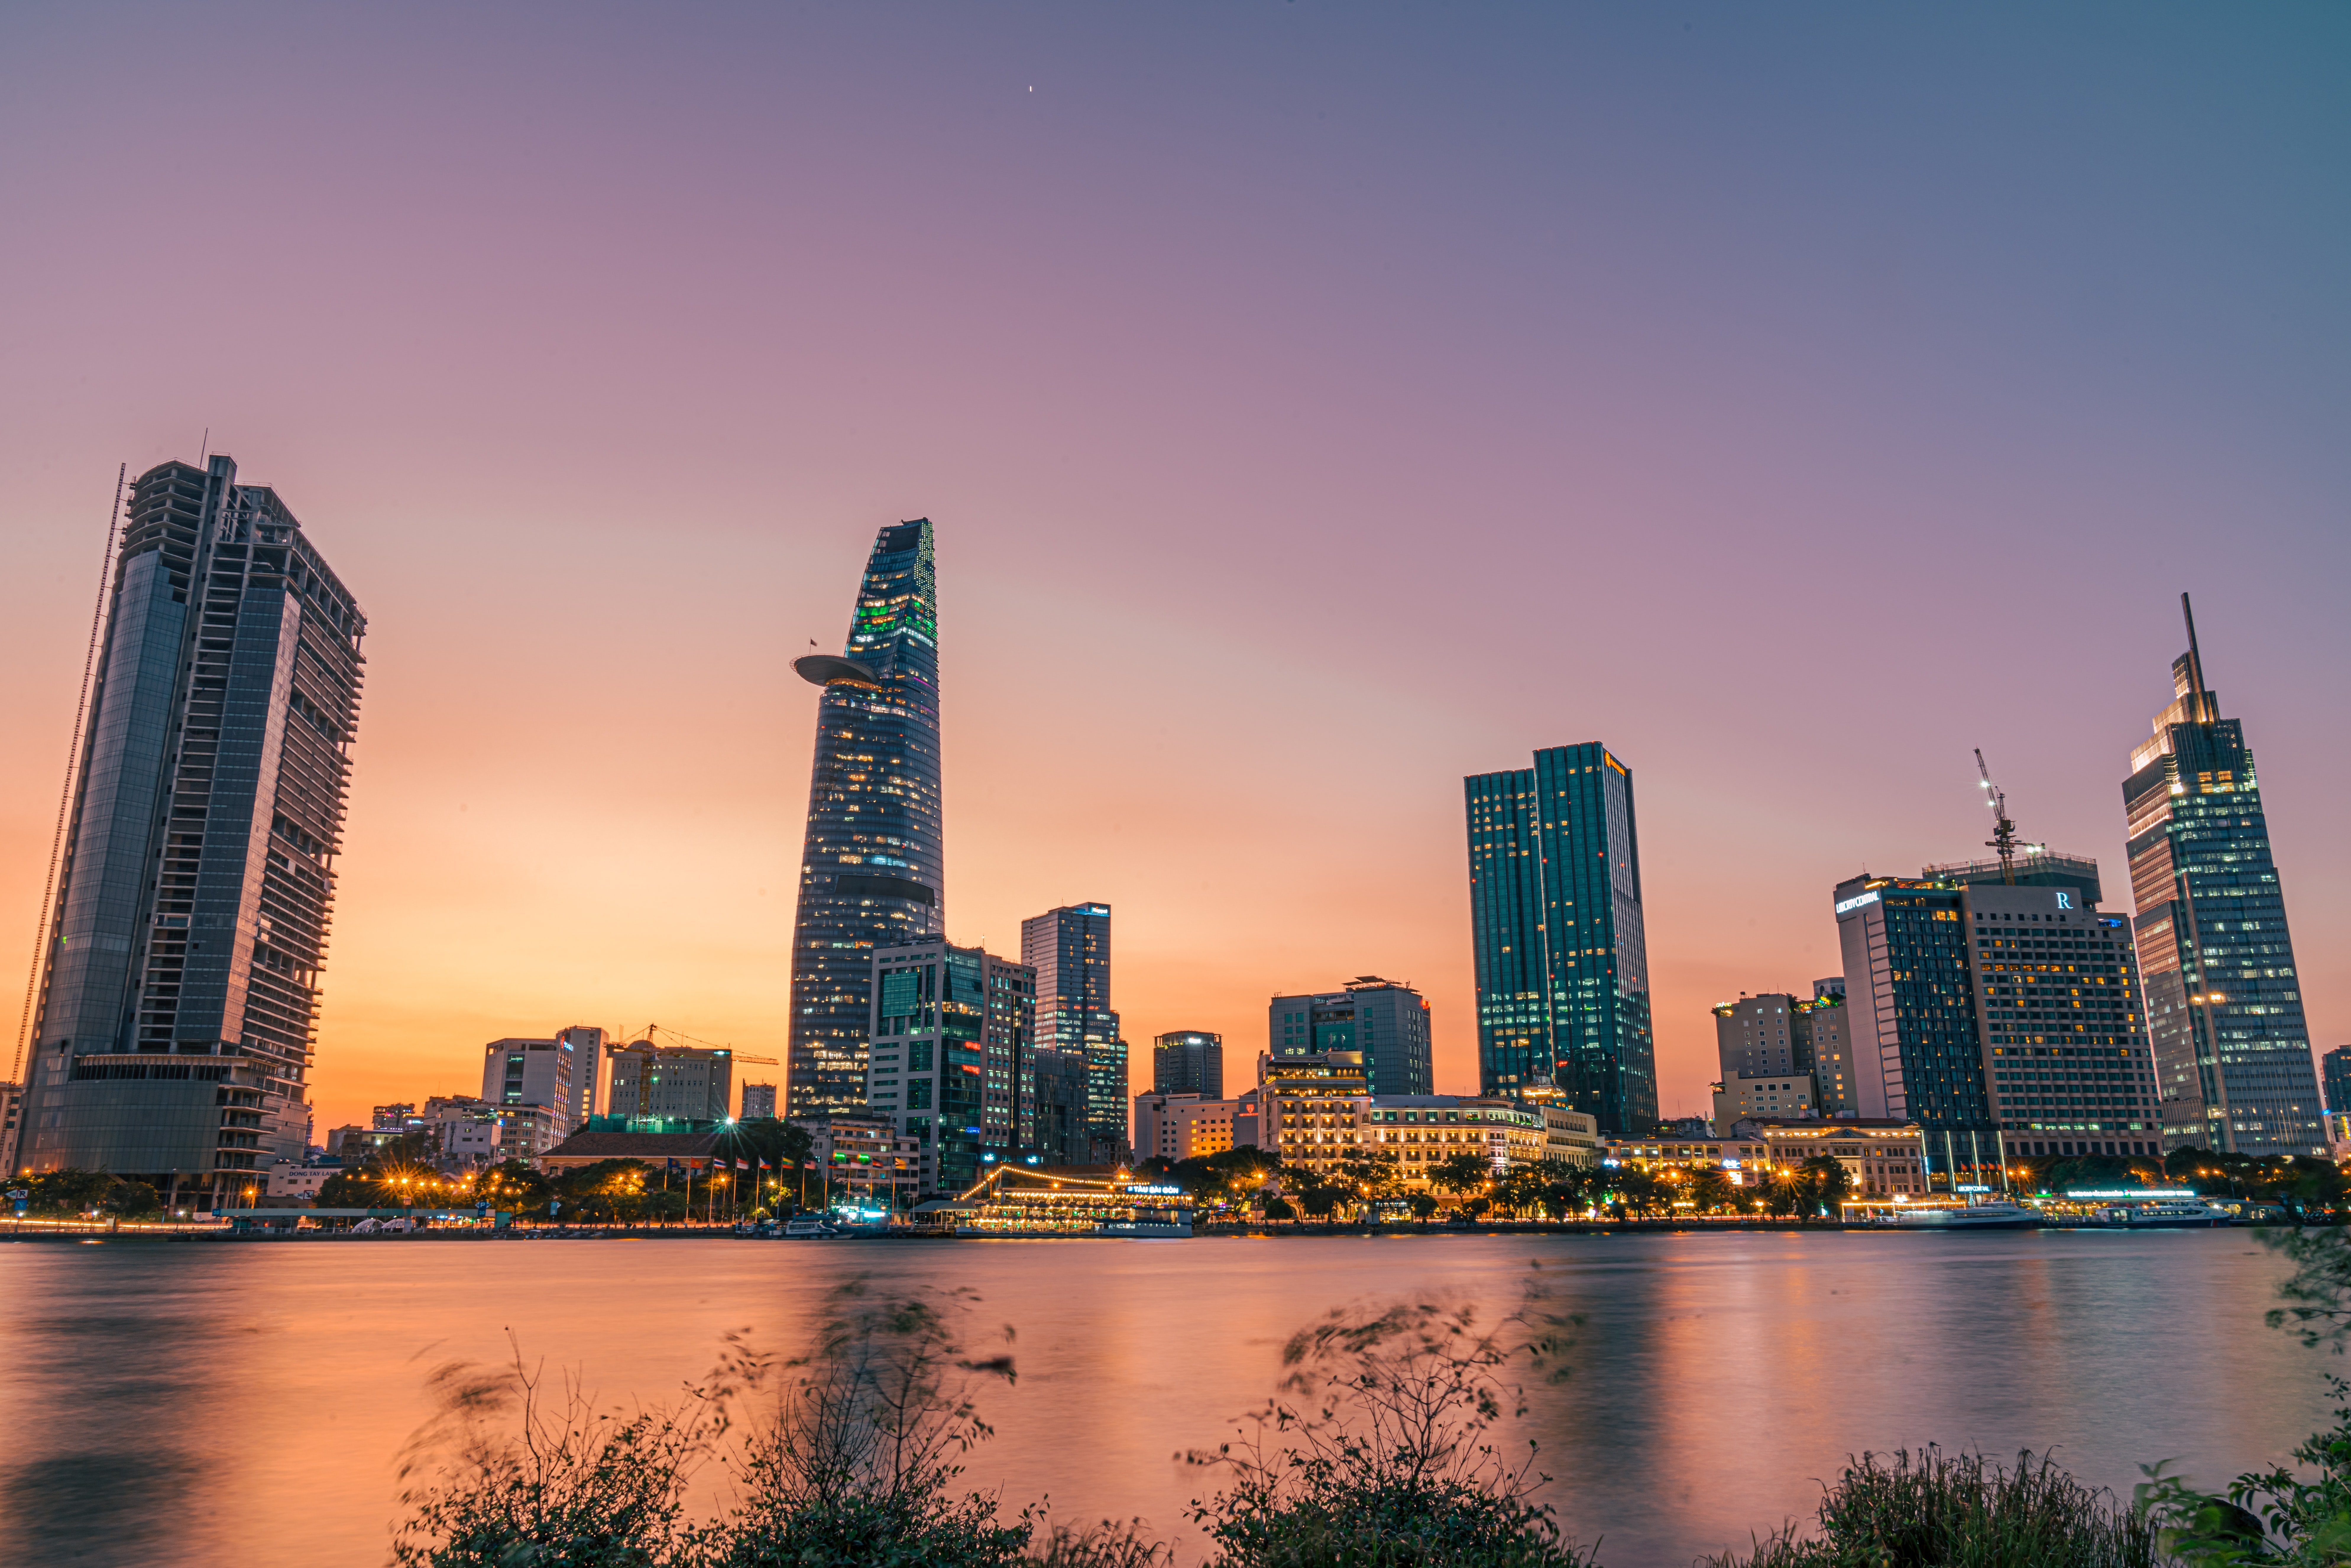 Ho Chi Minh City, Vietnam during the sunset.